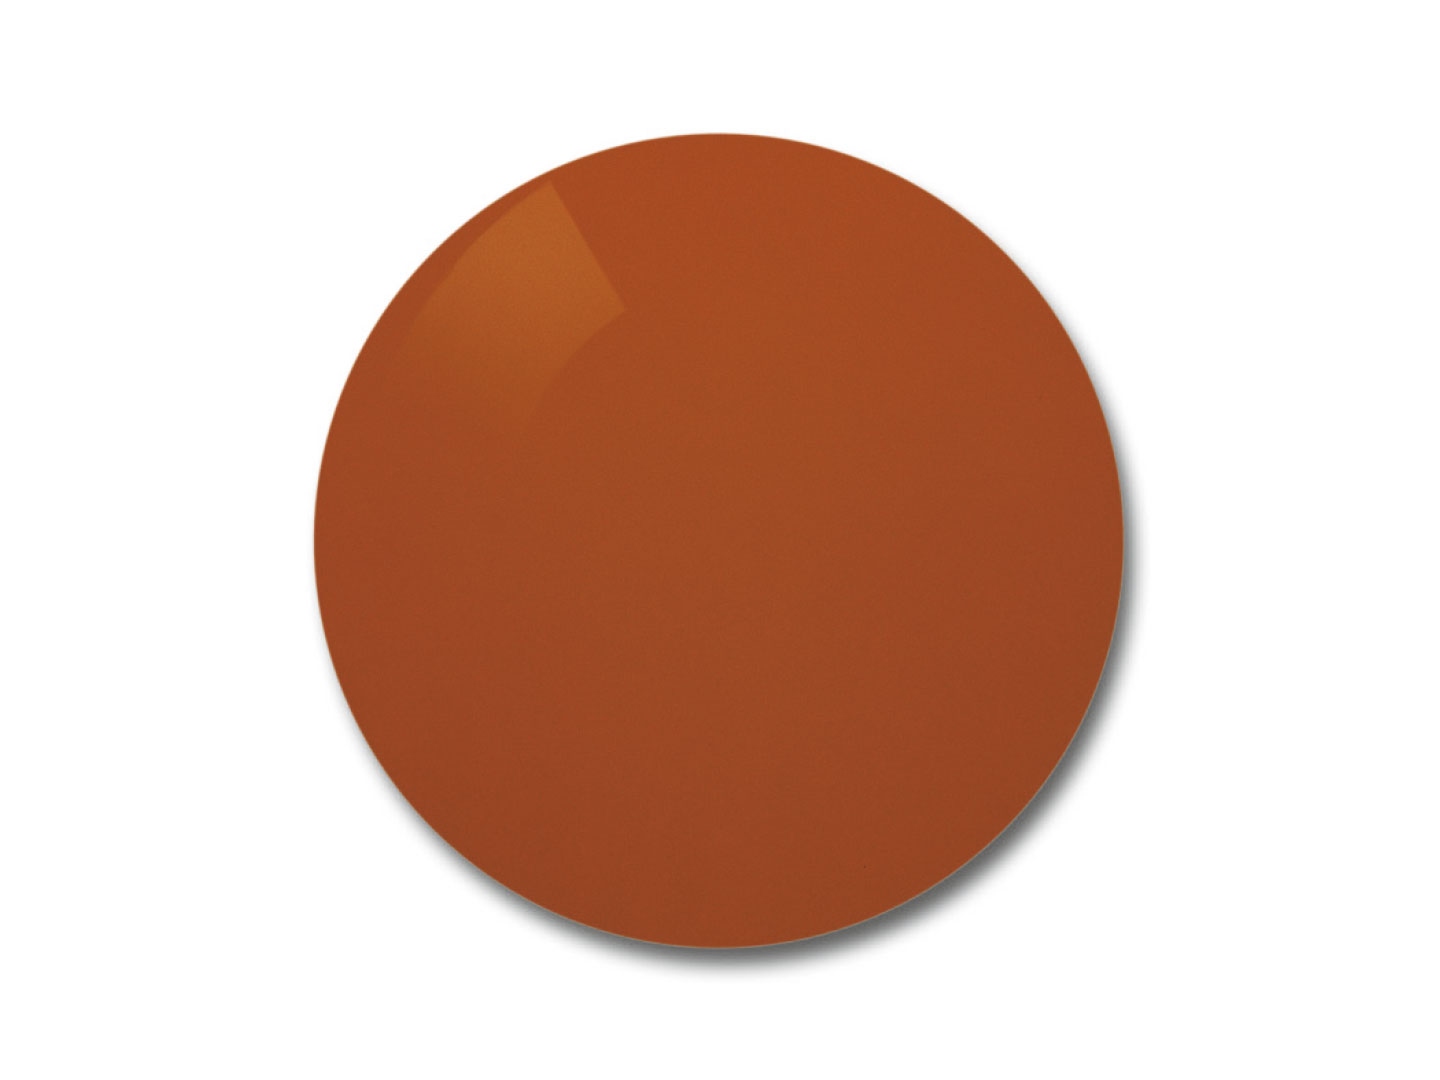 Illustration of ZEISS Skylet® Fun Lens with orange brown tint